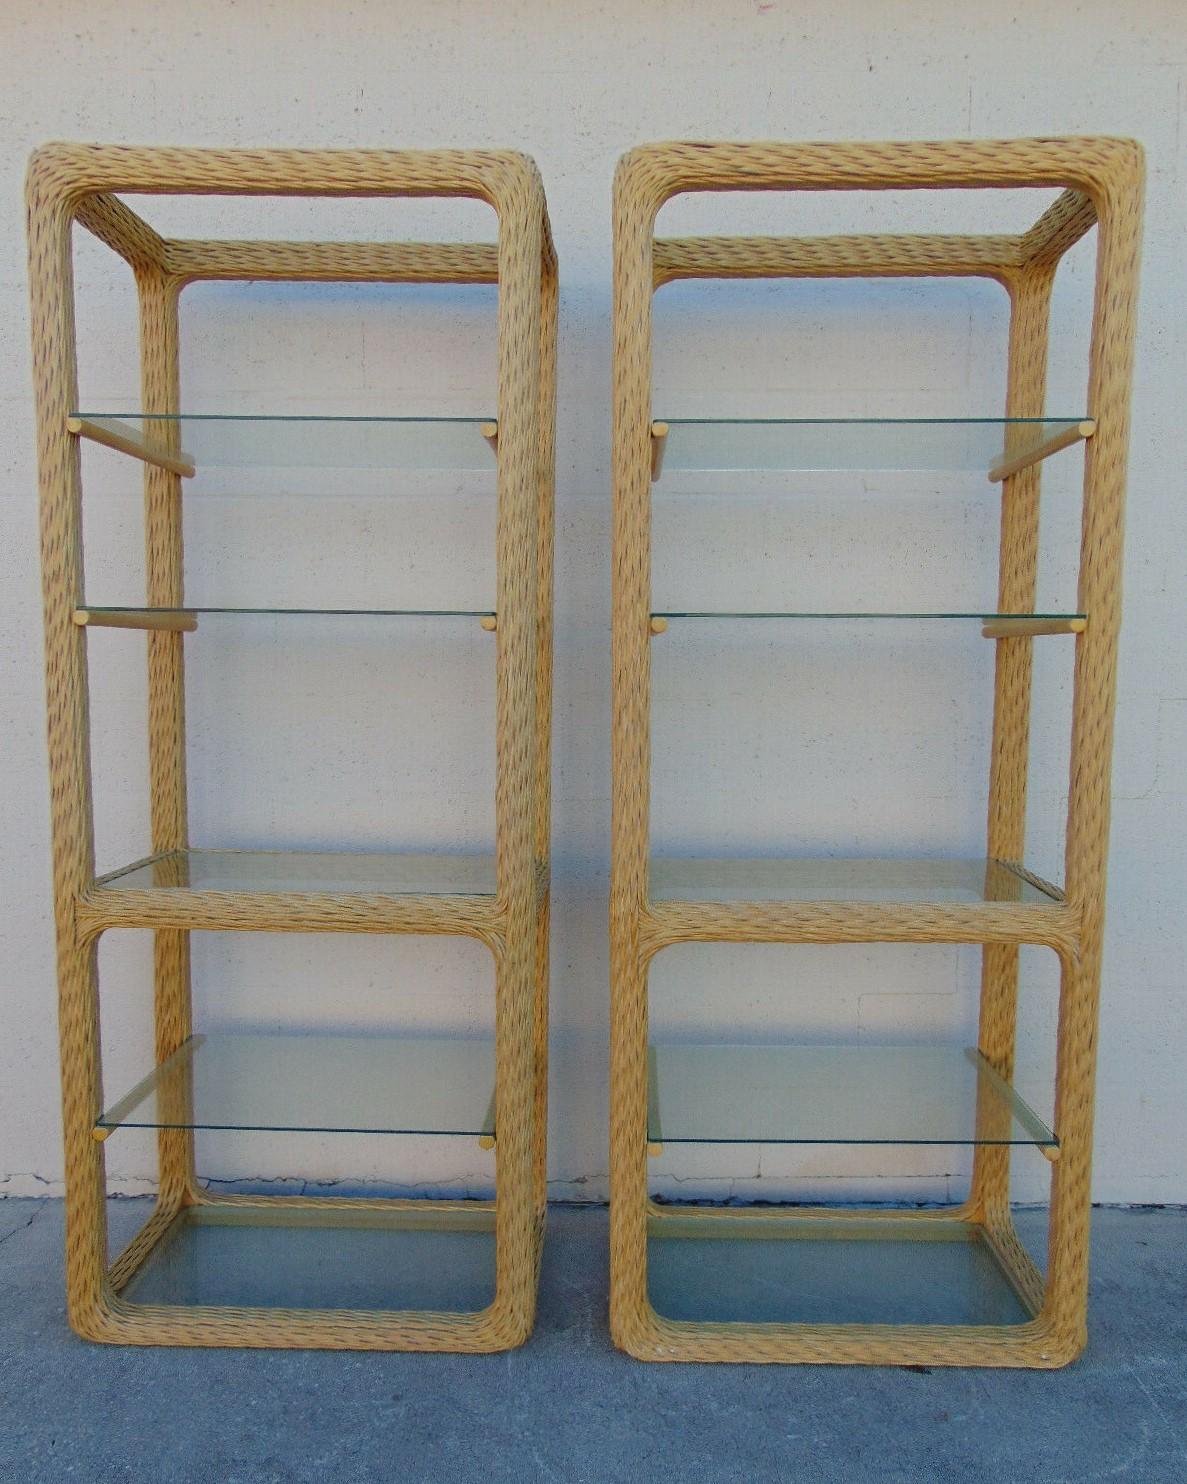 A pair of organic modern twisted rattan etageres, circa 1970s. These expertly handcrafted etageres, each with five glass display shelves designed within a braided rattan frame, offer a convenient and attractive space to display books, objects and